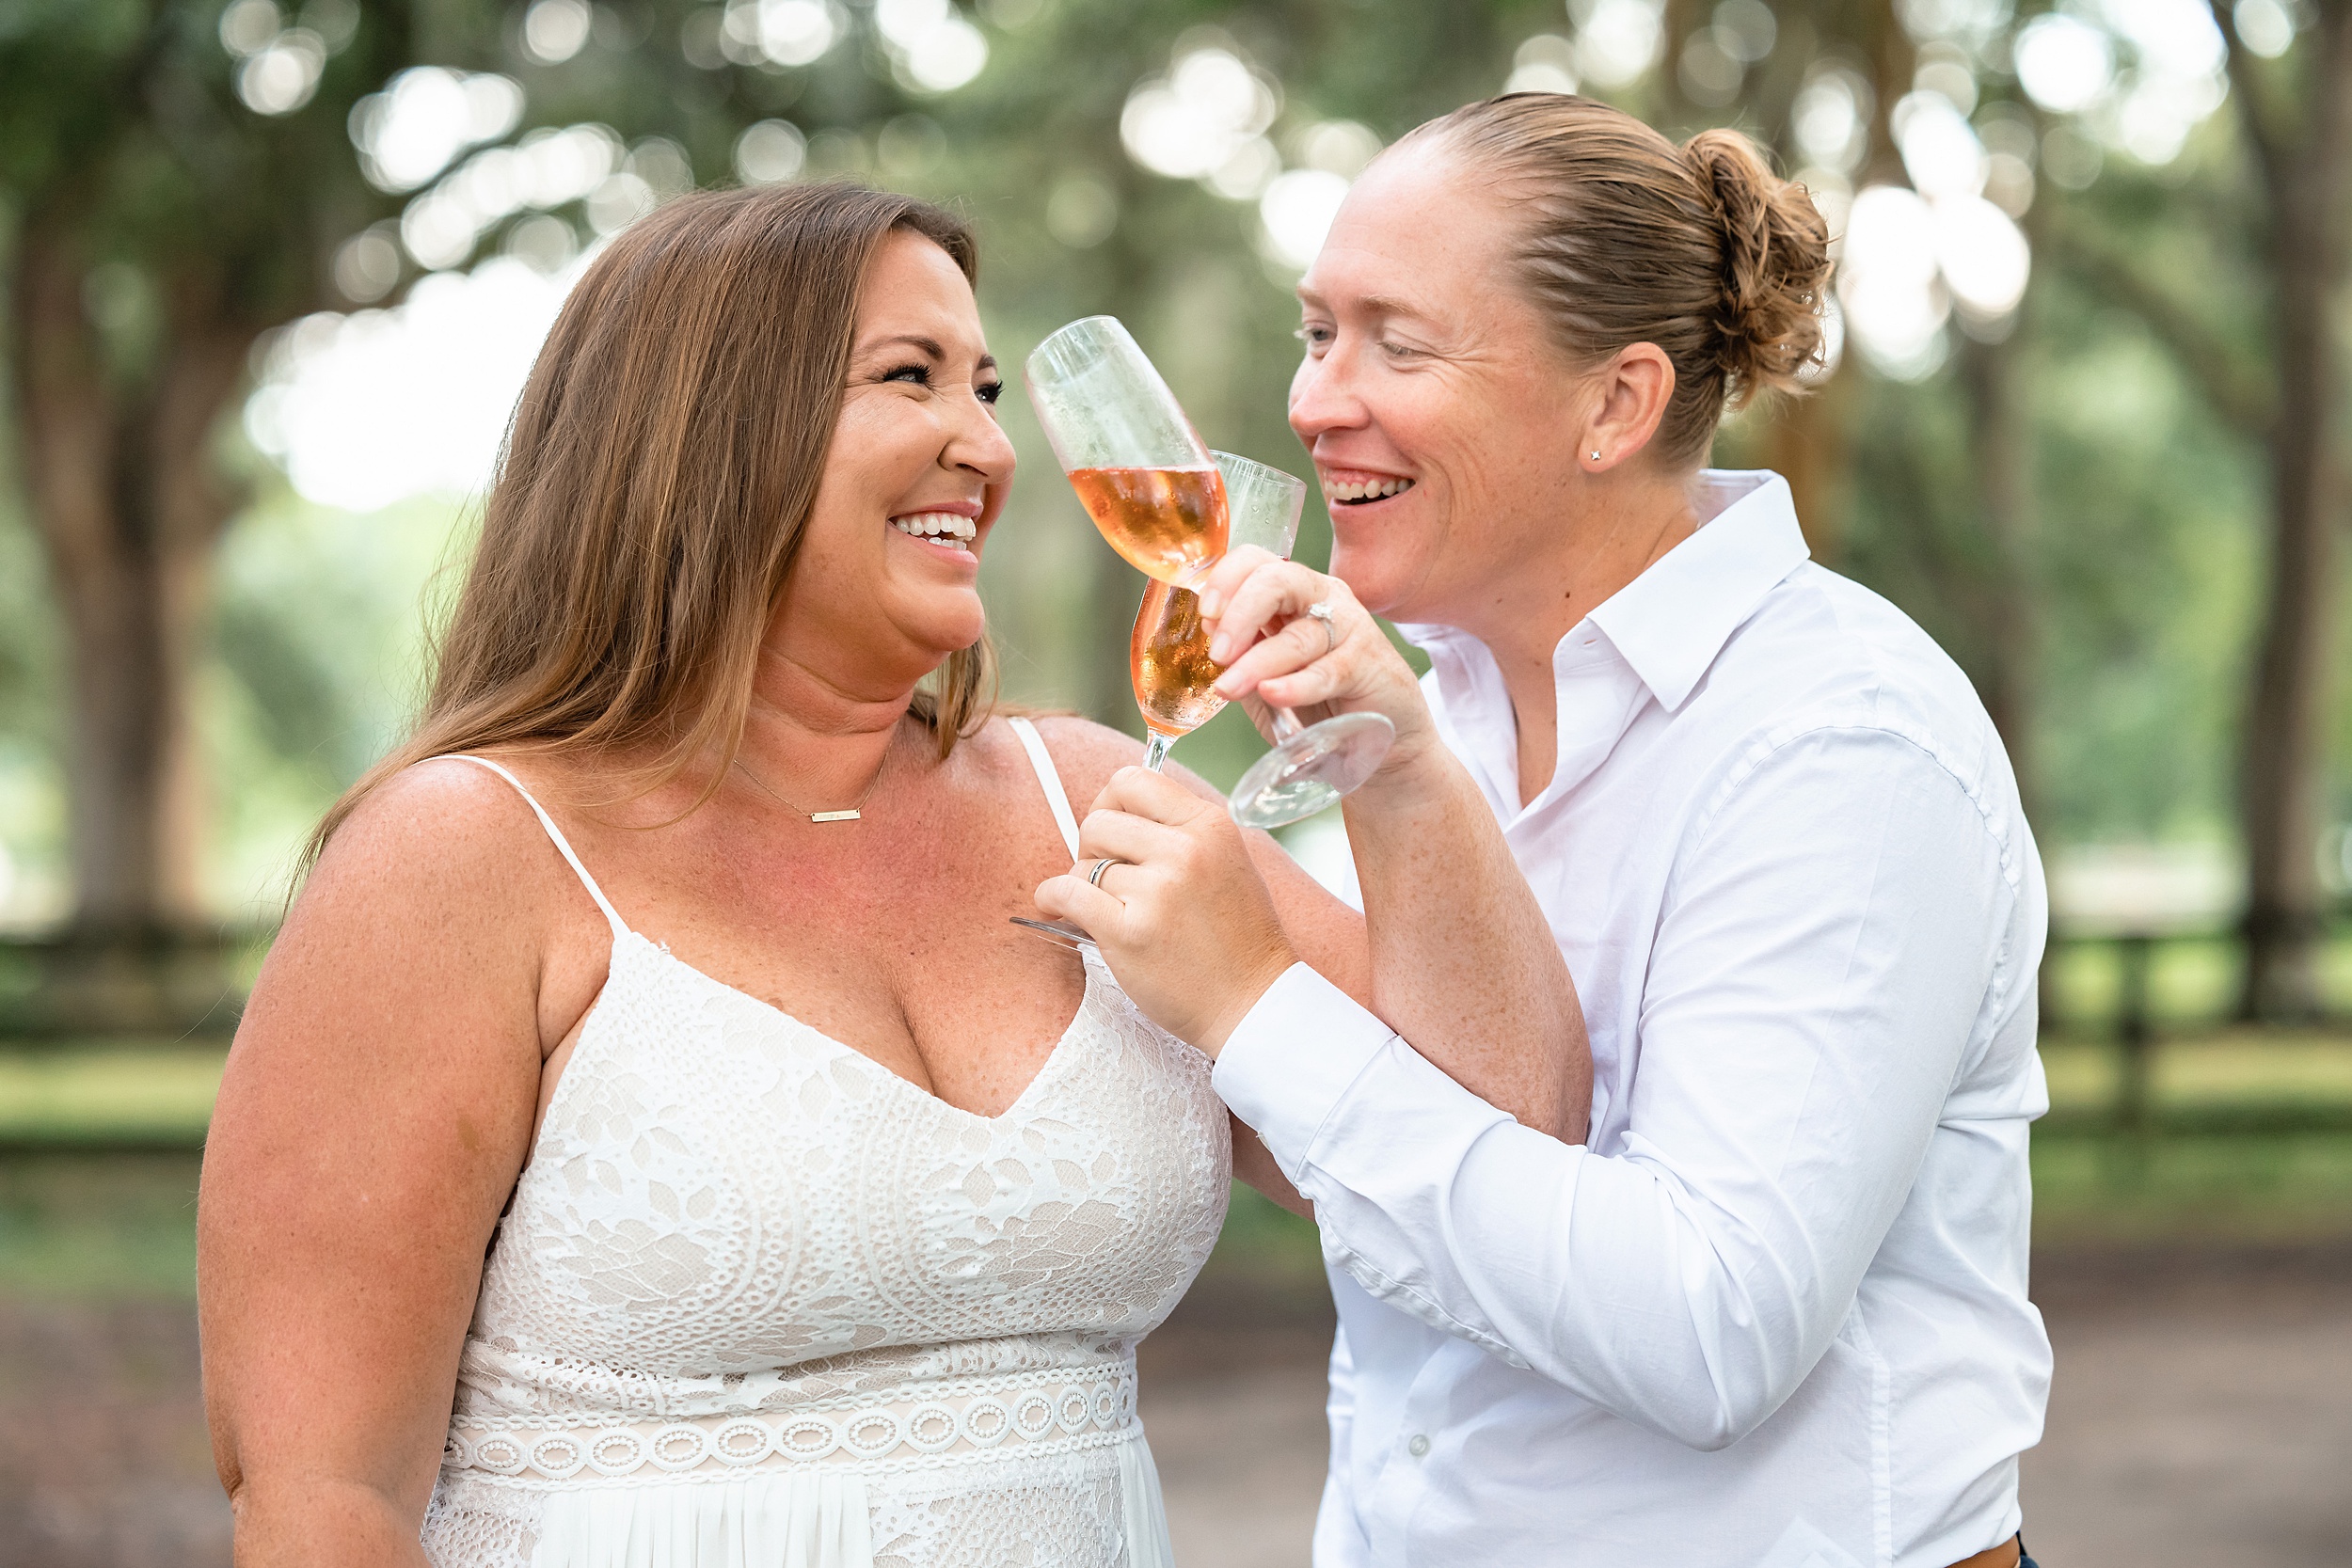 Newlyweds toast with pink champagne outside under some trees